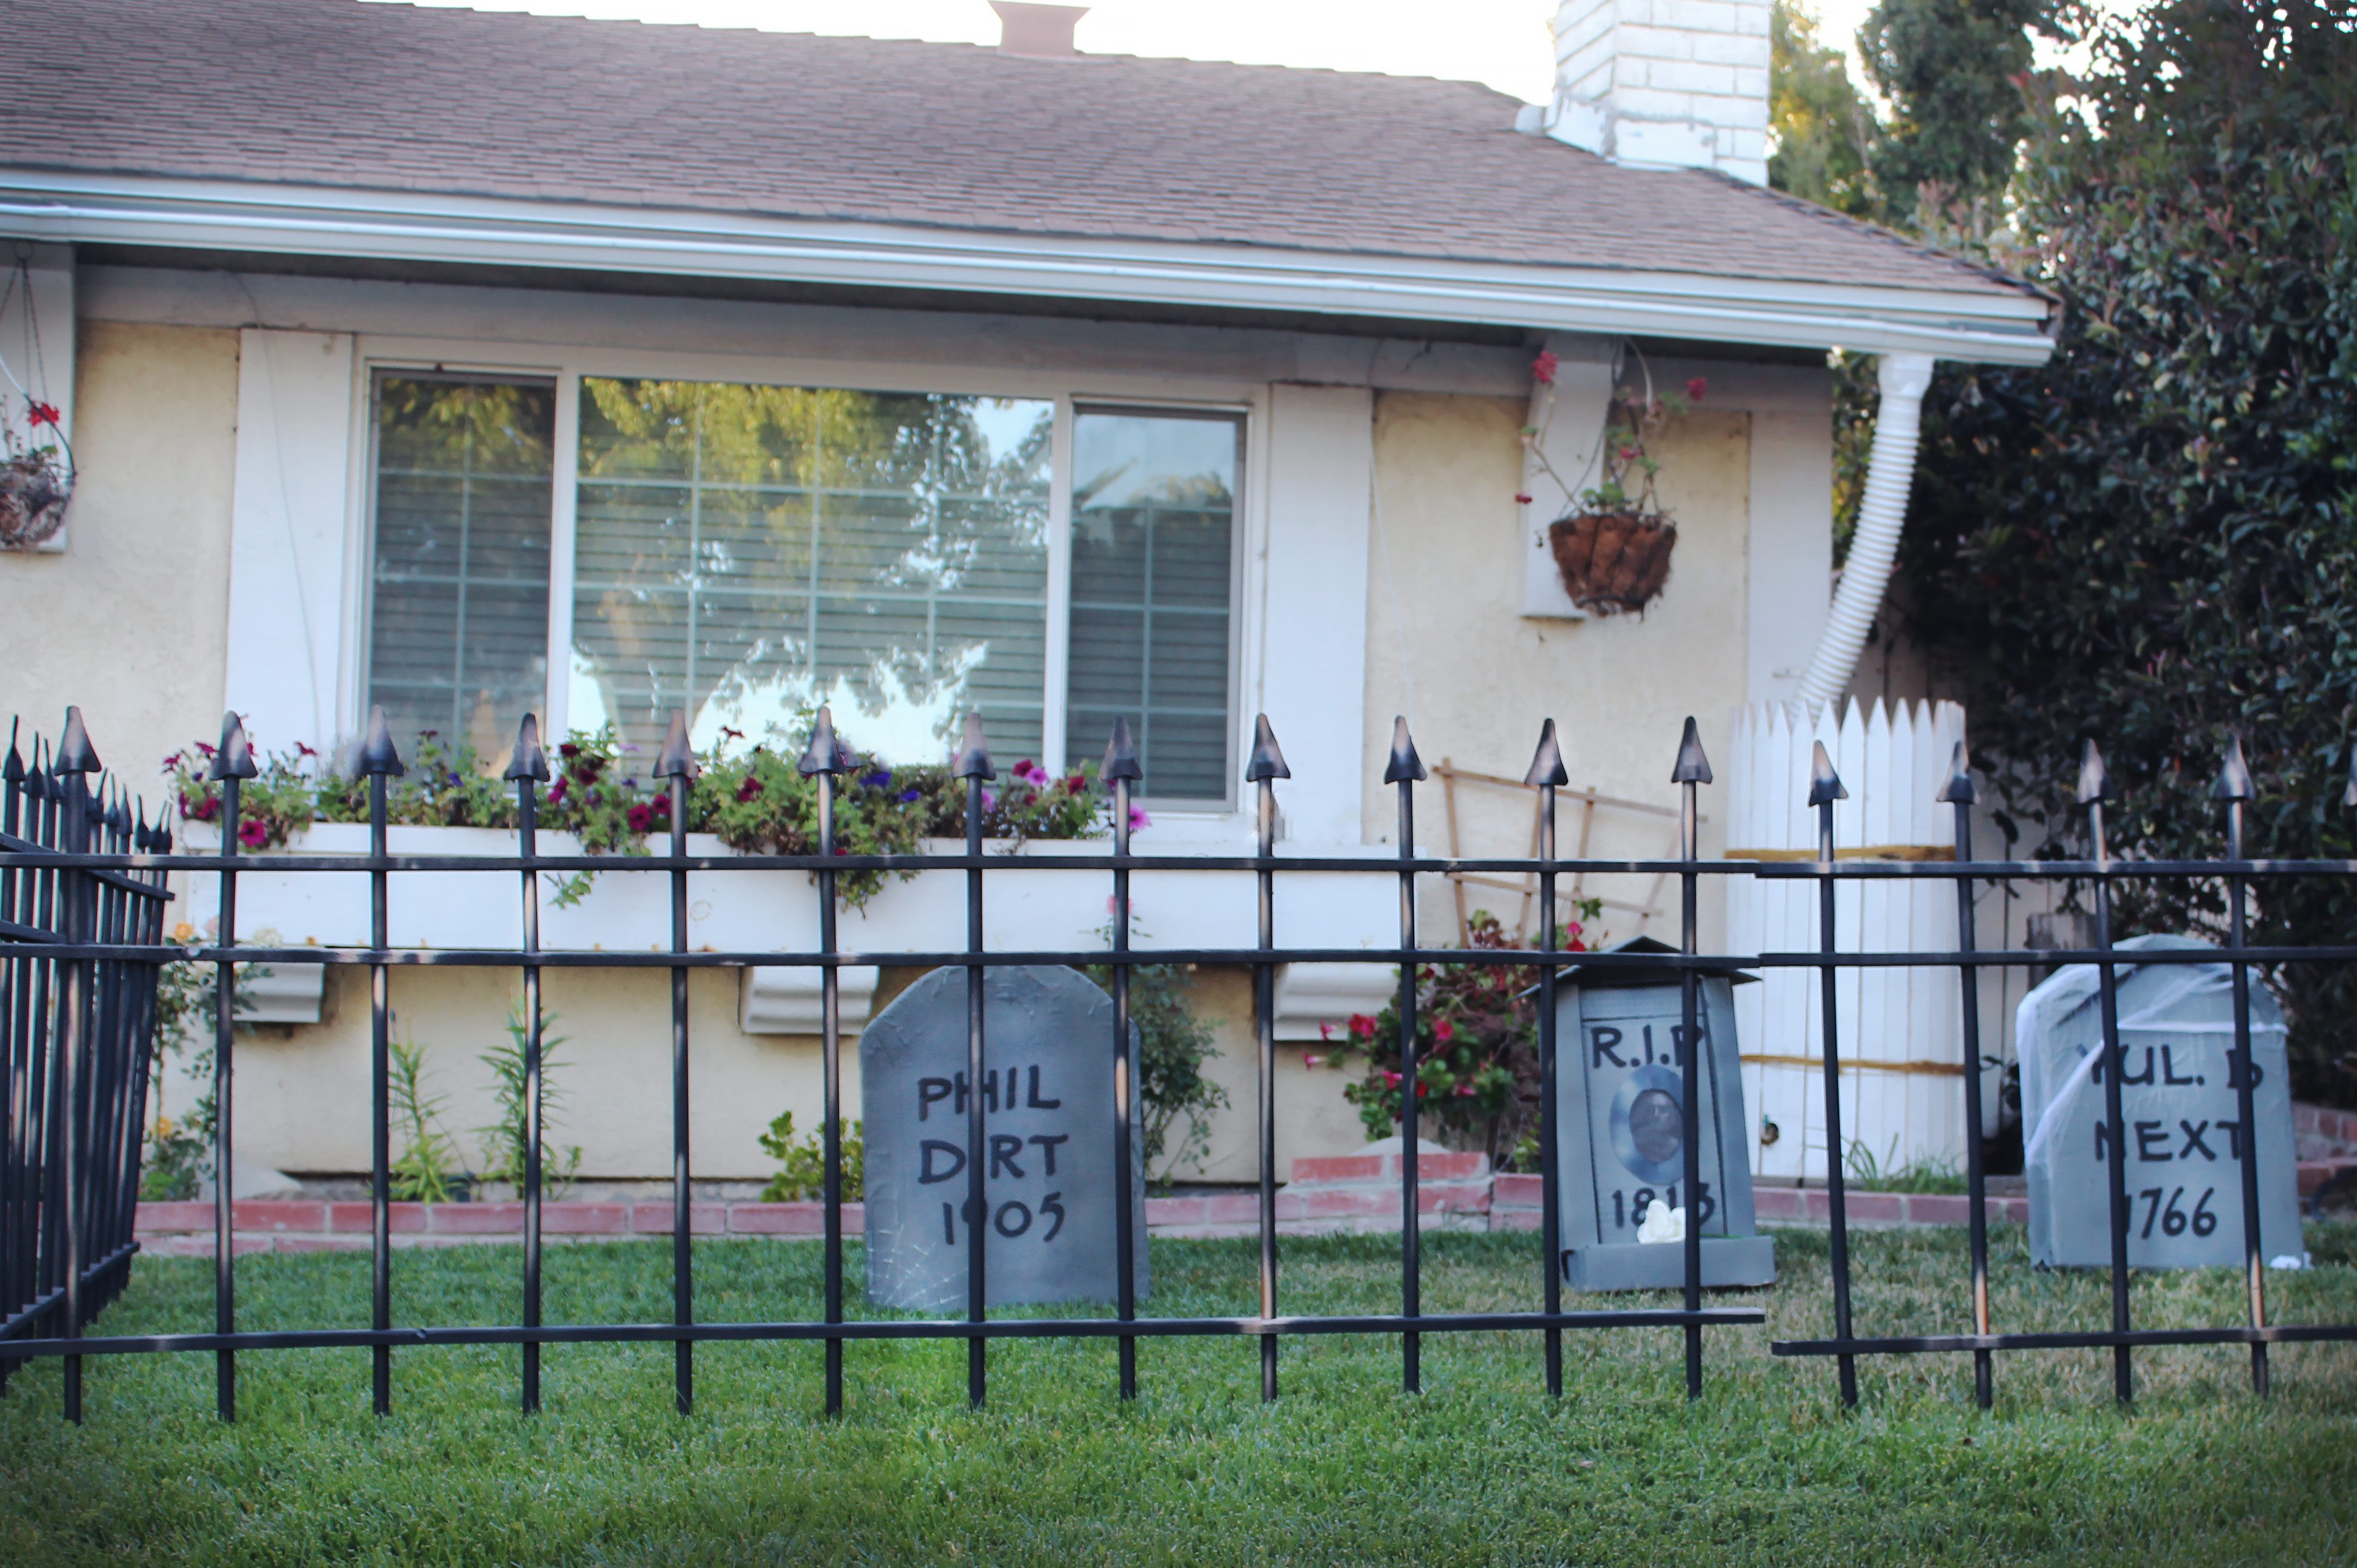 Halloween Graveyard Fence
 How to Make a Cheap Cemetery Fence for Halloween